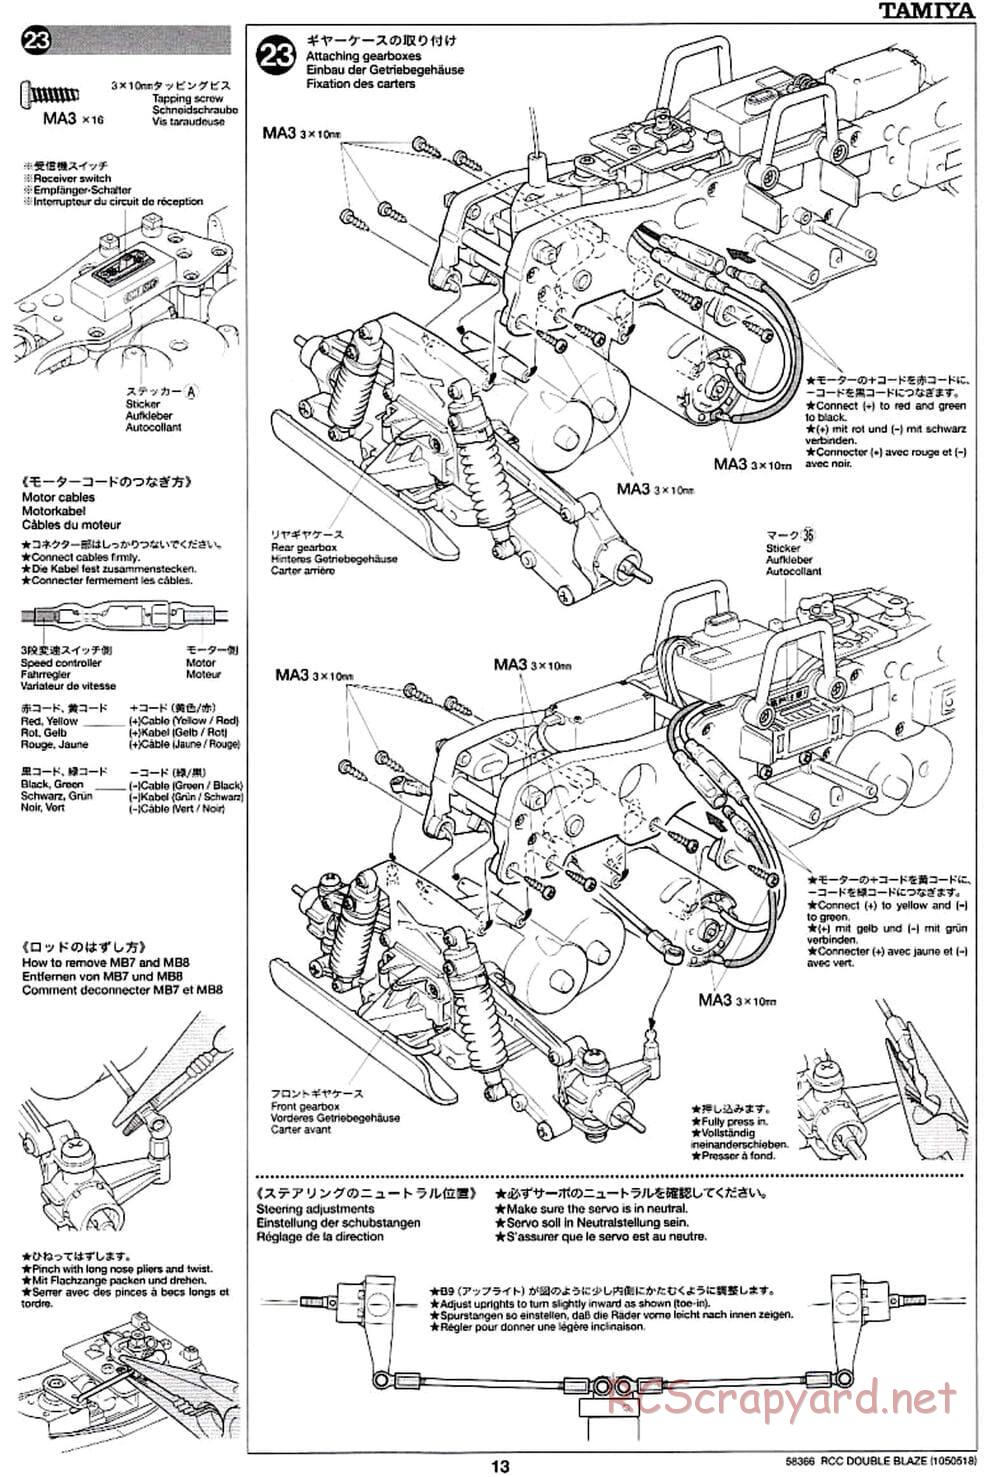 Tamiya - Double Blaze - WR-01 Chassis - Manual - Page 13